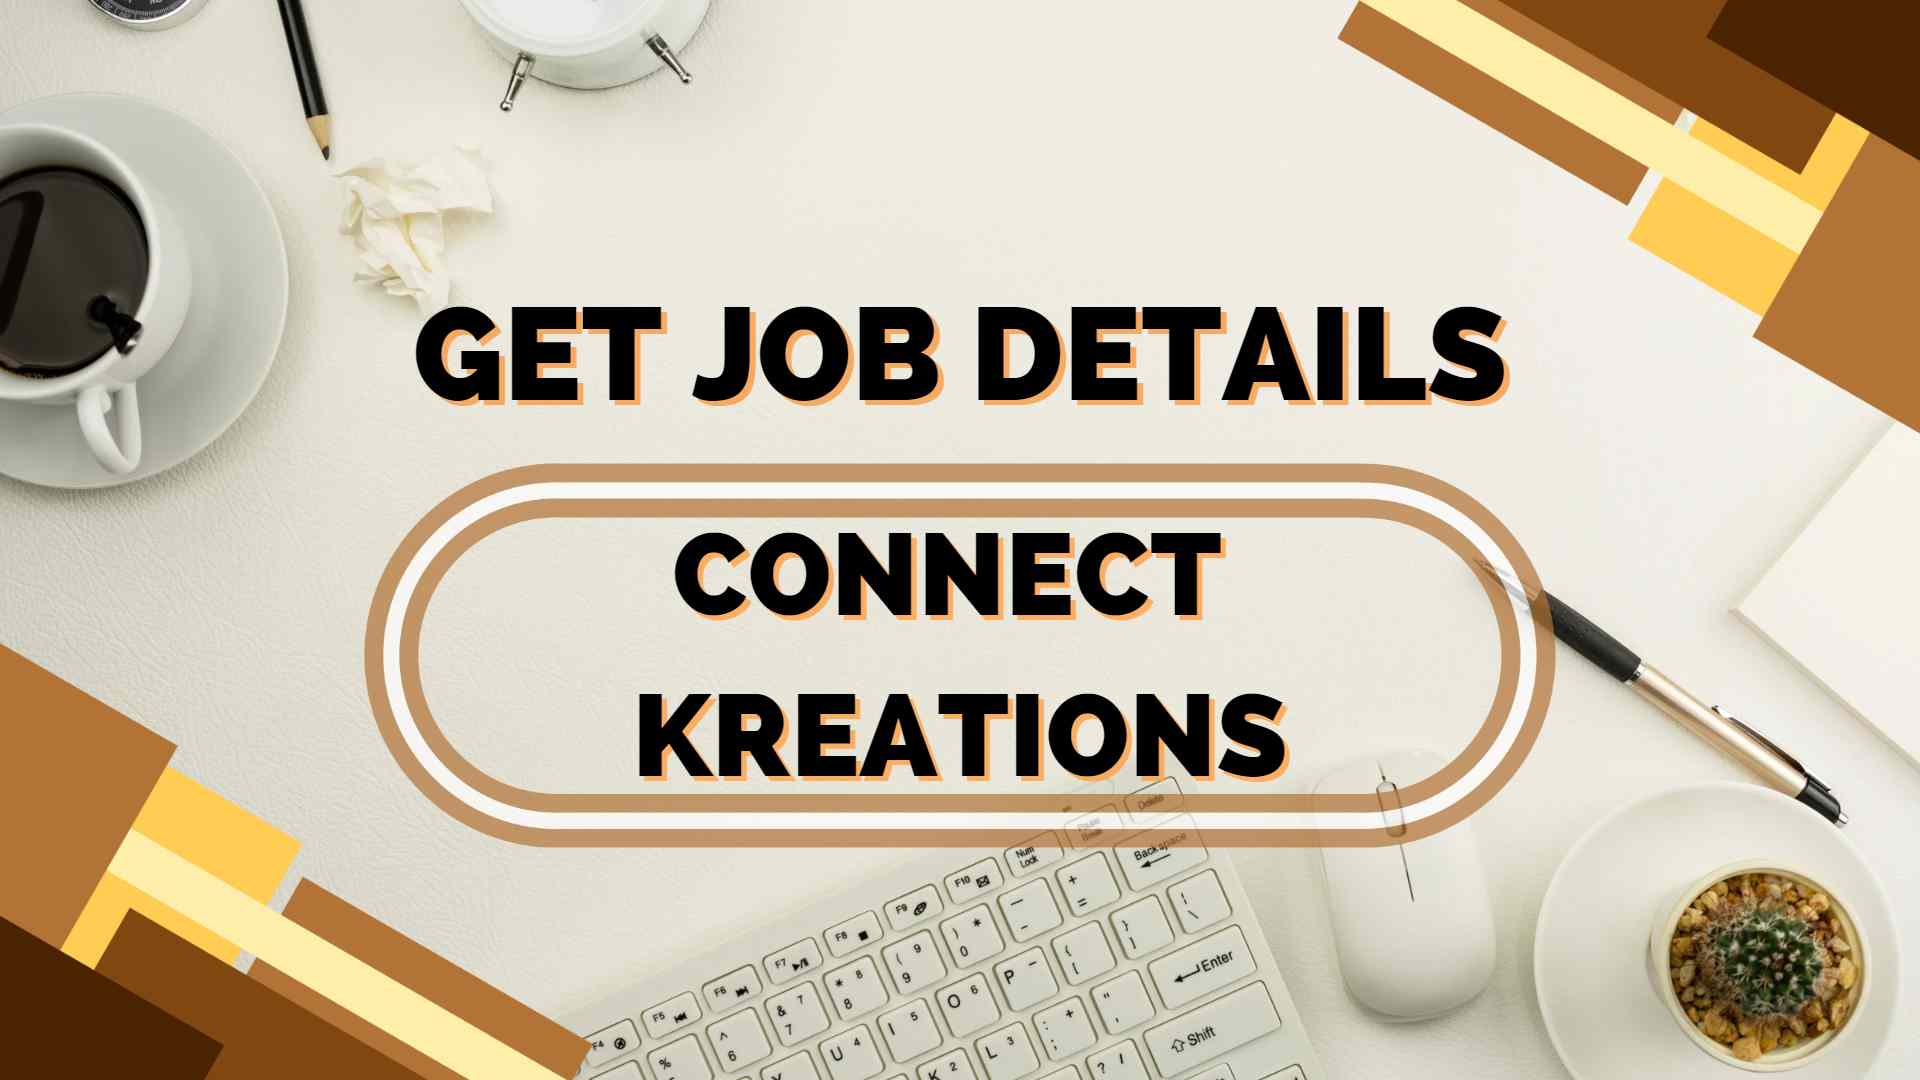 Connect Kreations-Hiring